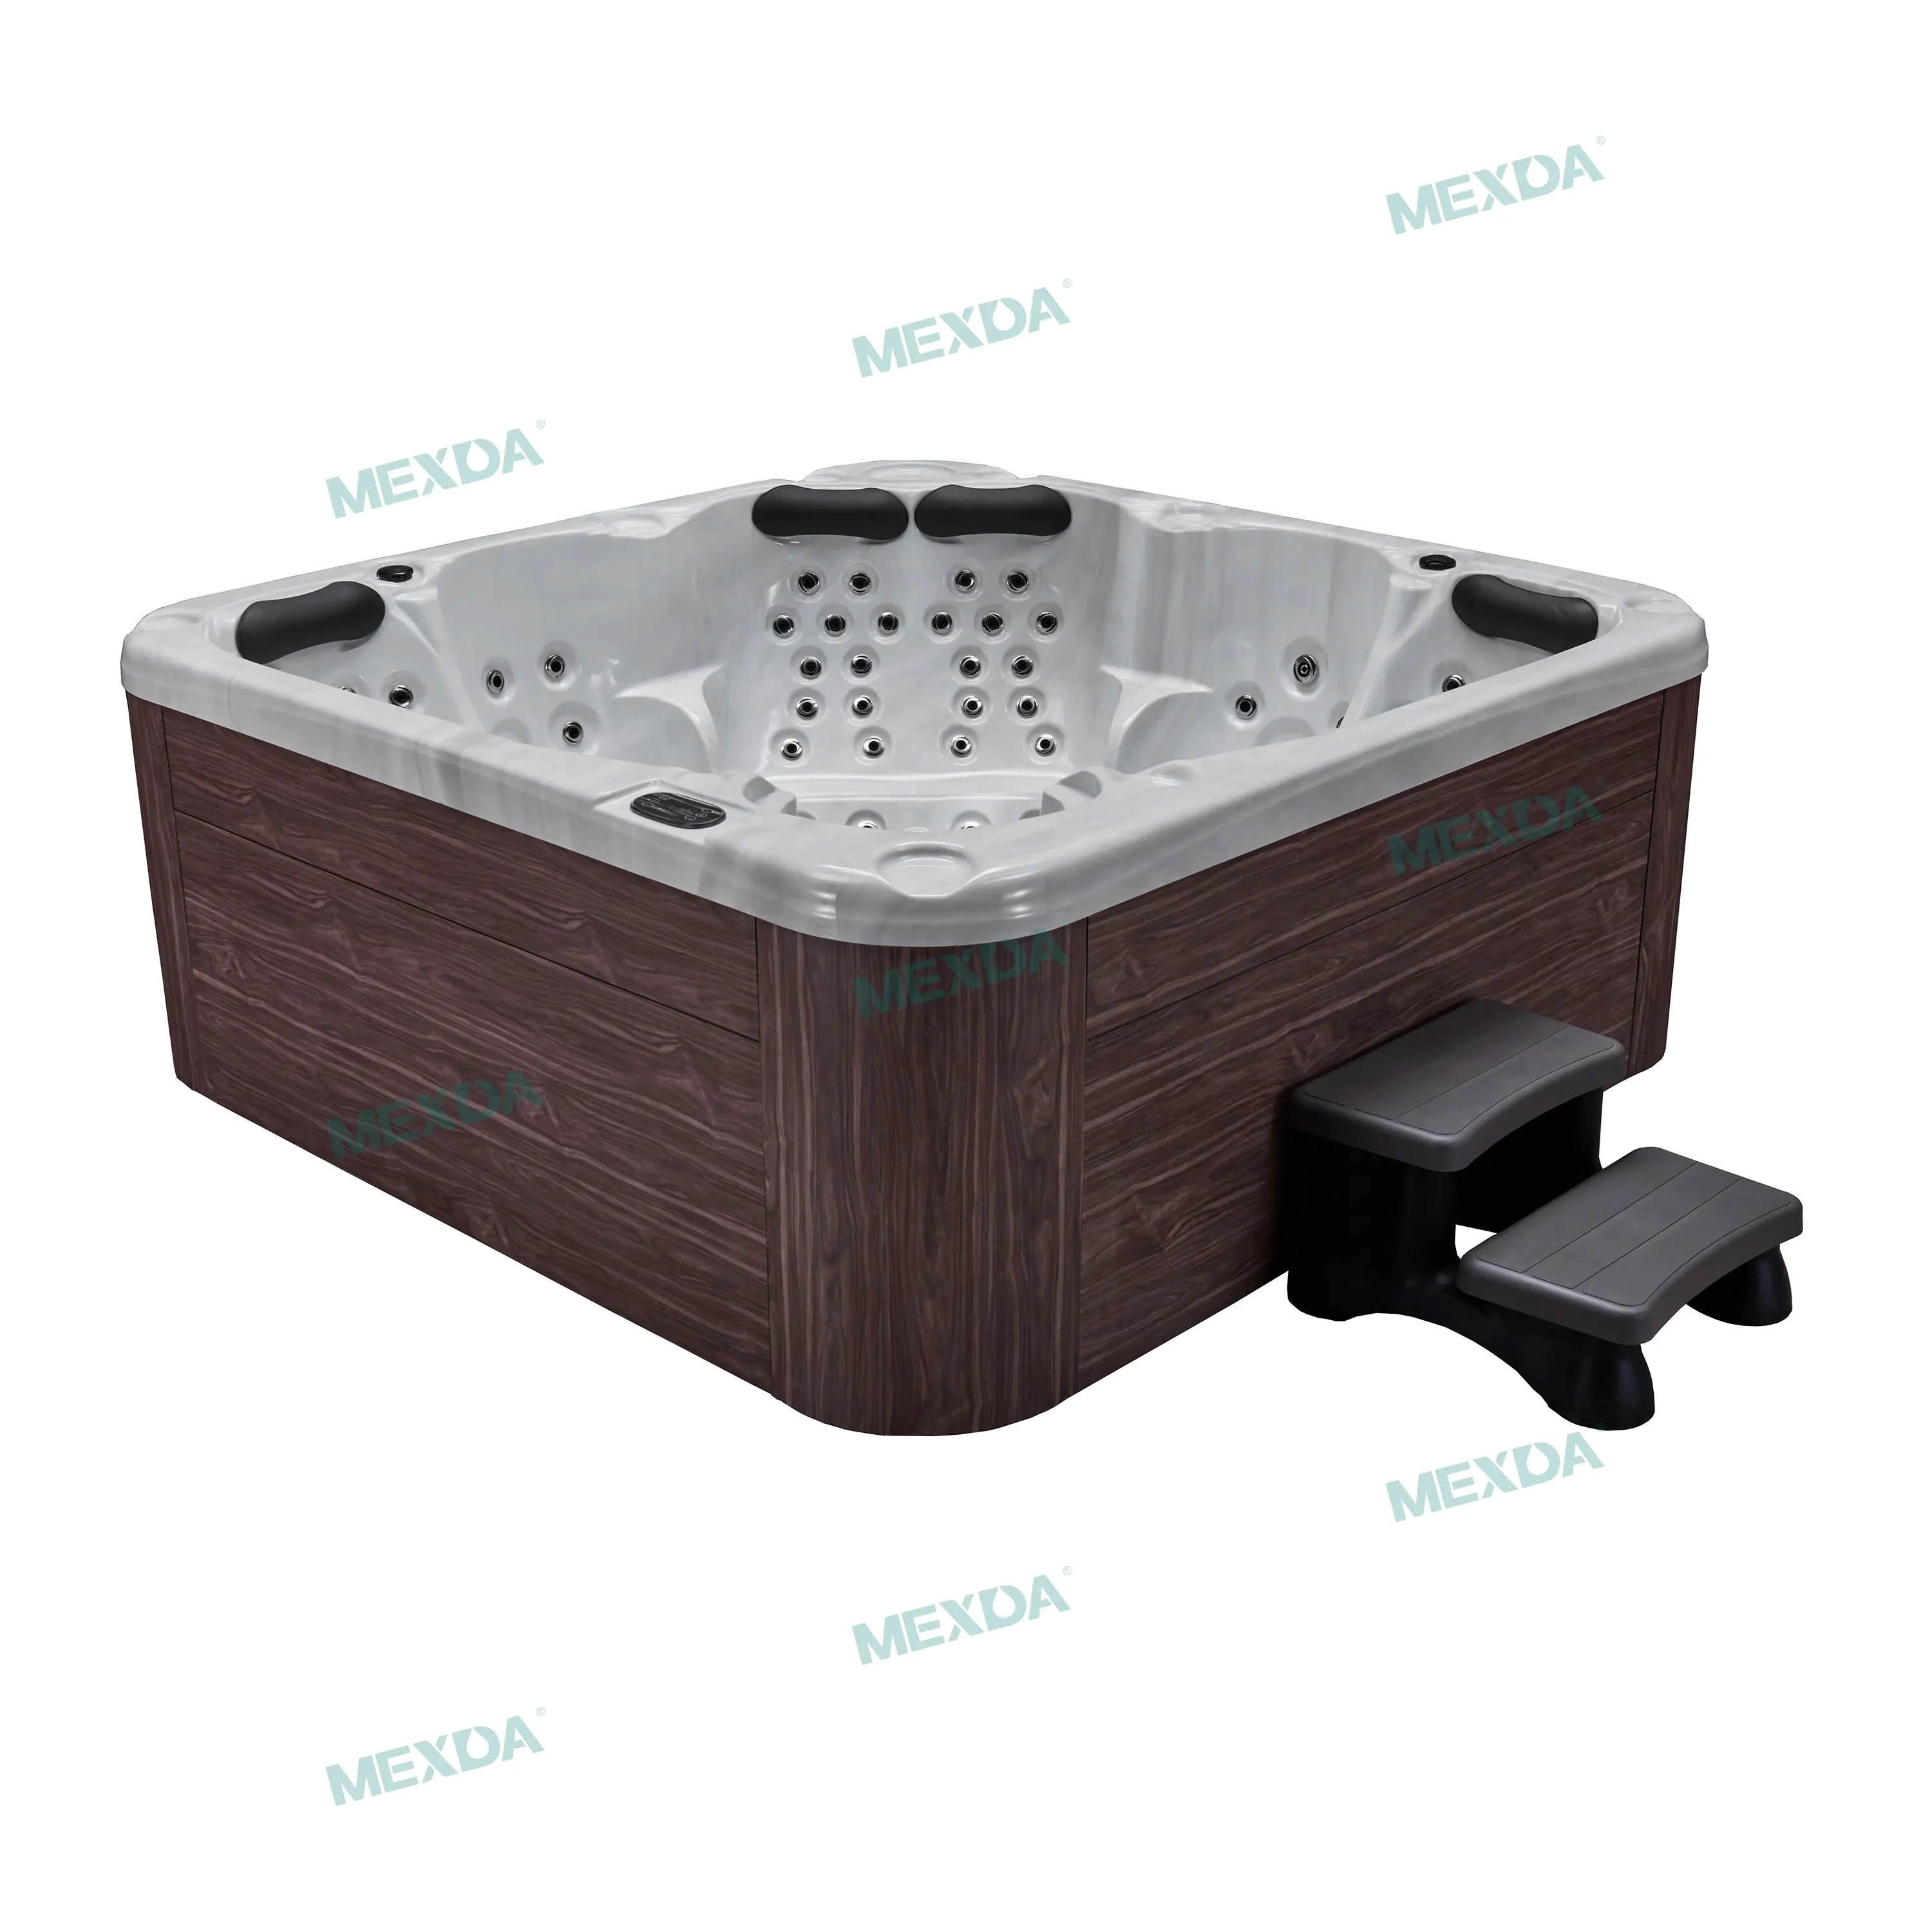 MEXDA Acrylic Whirlpool Massage Luxury Outdoor Spa Hot Tub 6 Person Freestanding Bathtub with Seat WS-598D